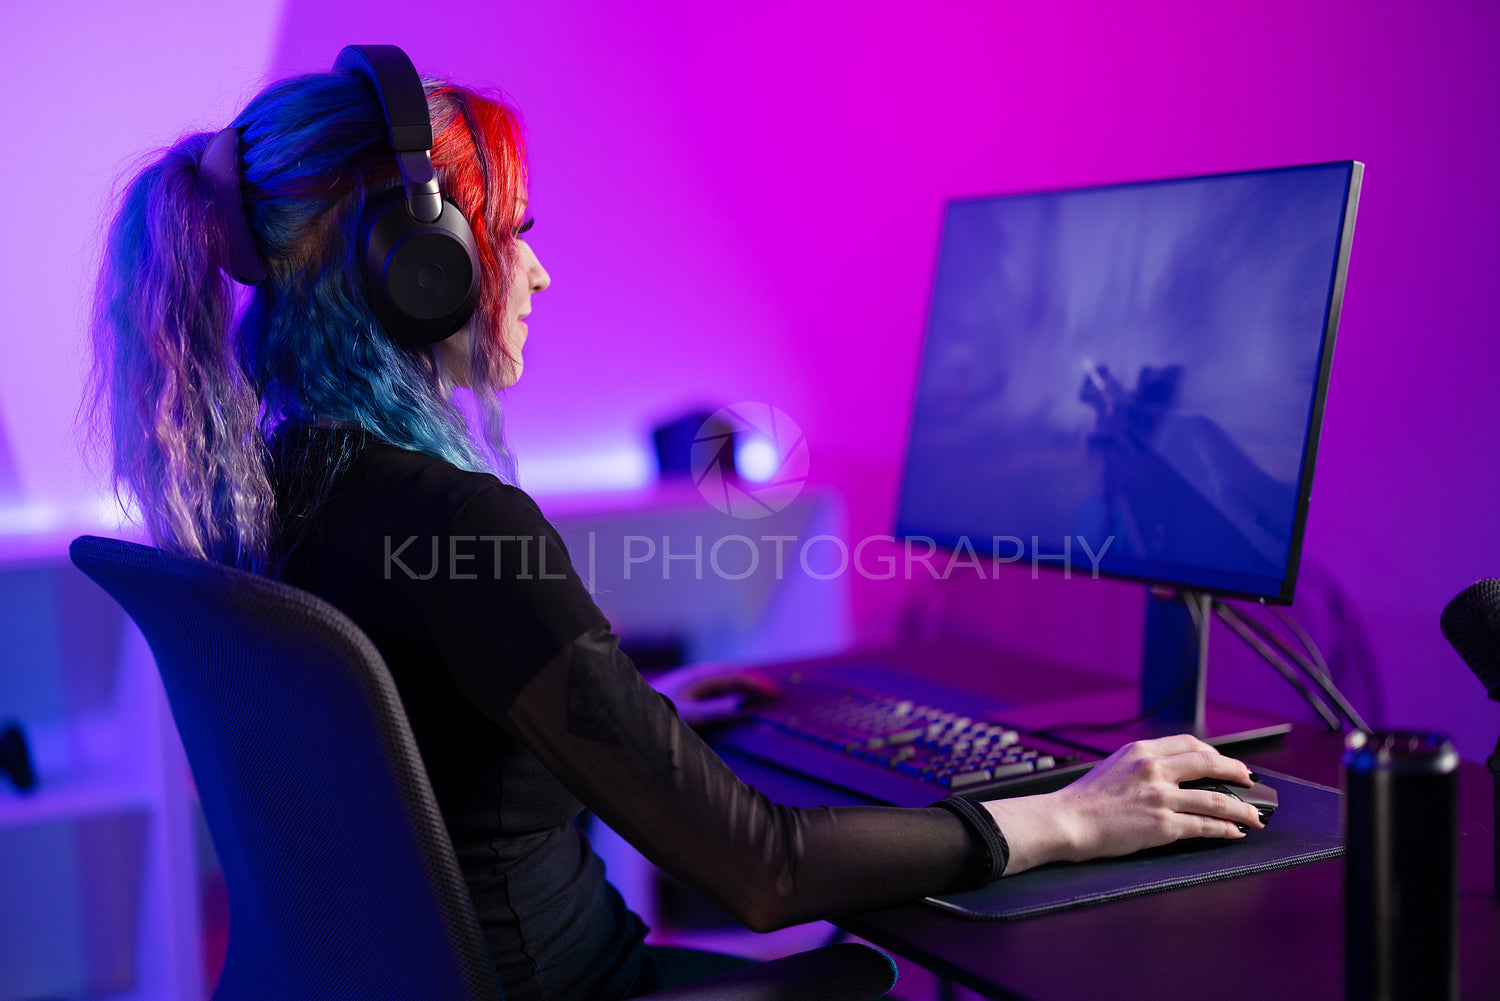 Focused Gamer Playing first-person shooter in a Vibrant, Colorful Room